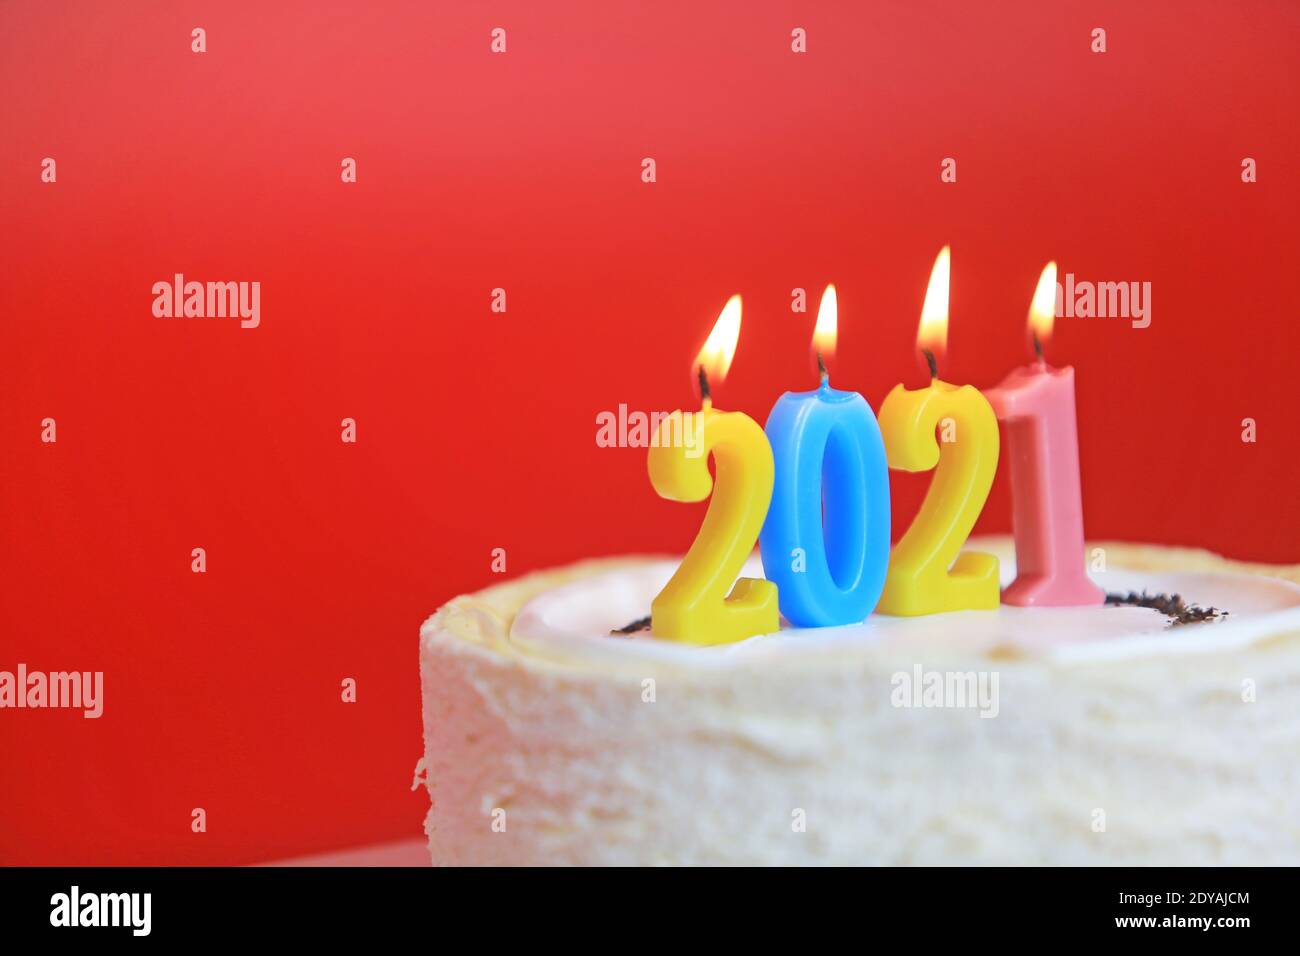 2021 calendar on the cake with red background Stock Photo